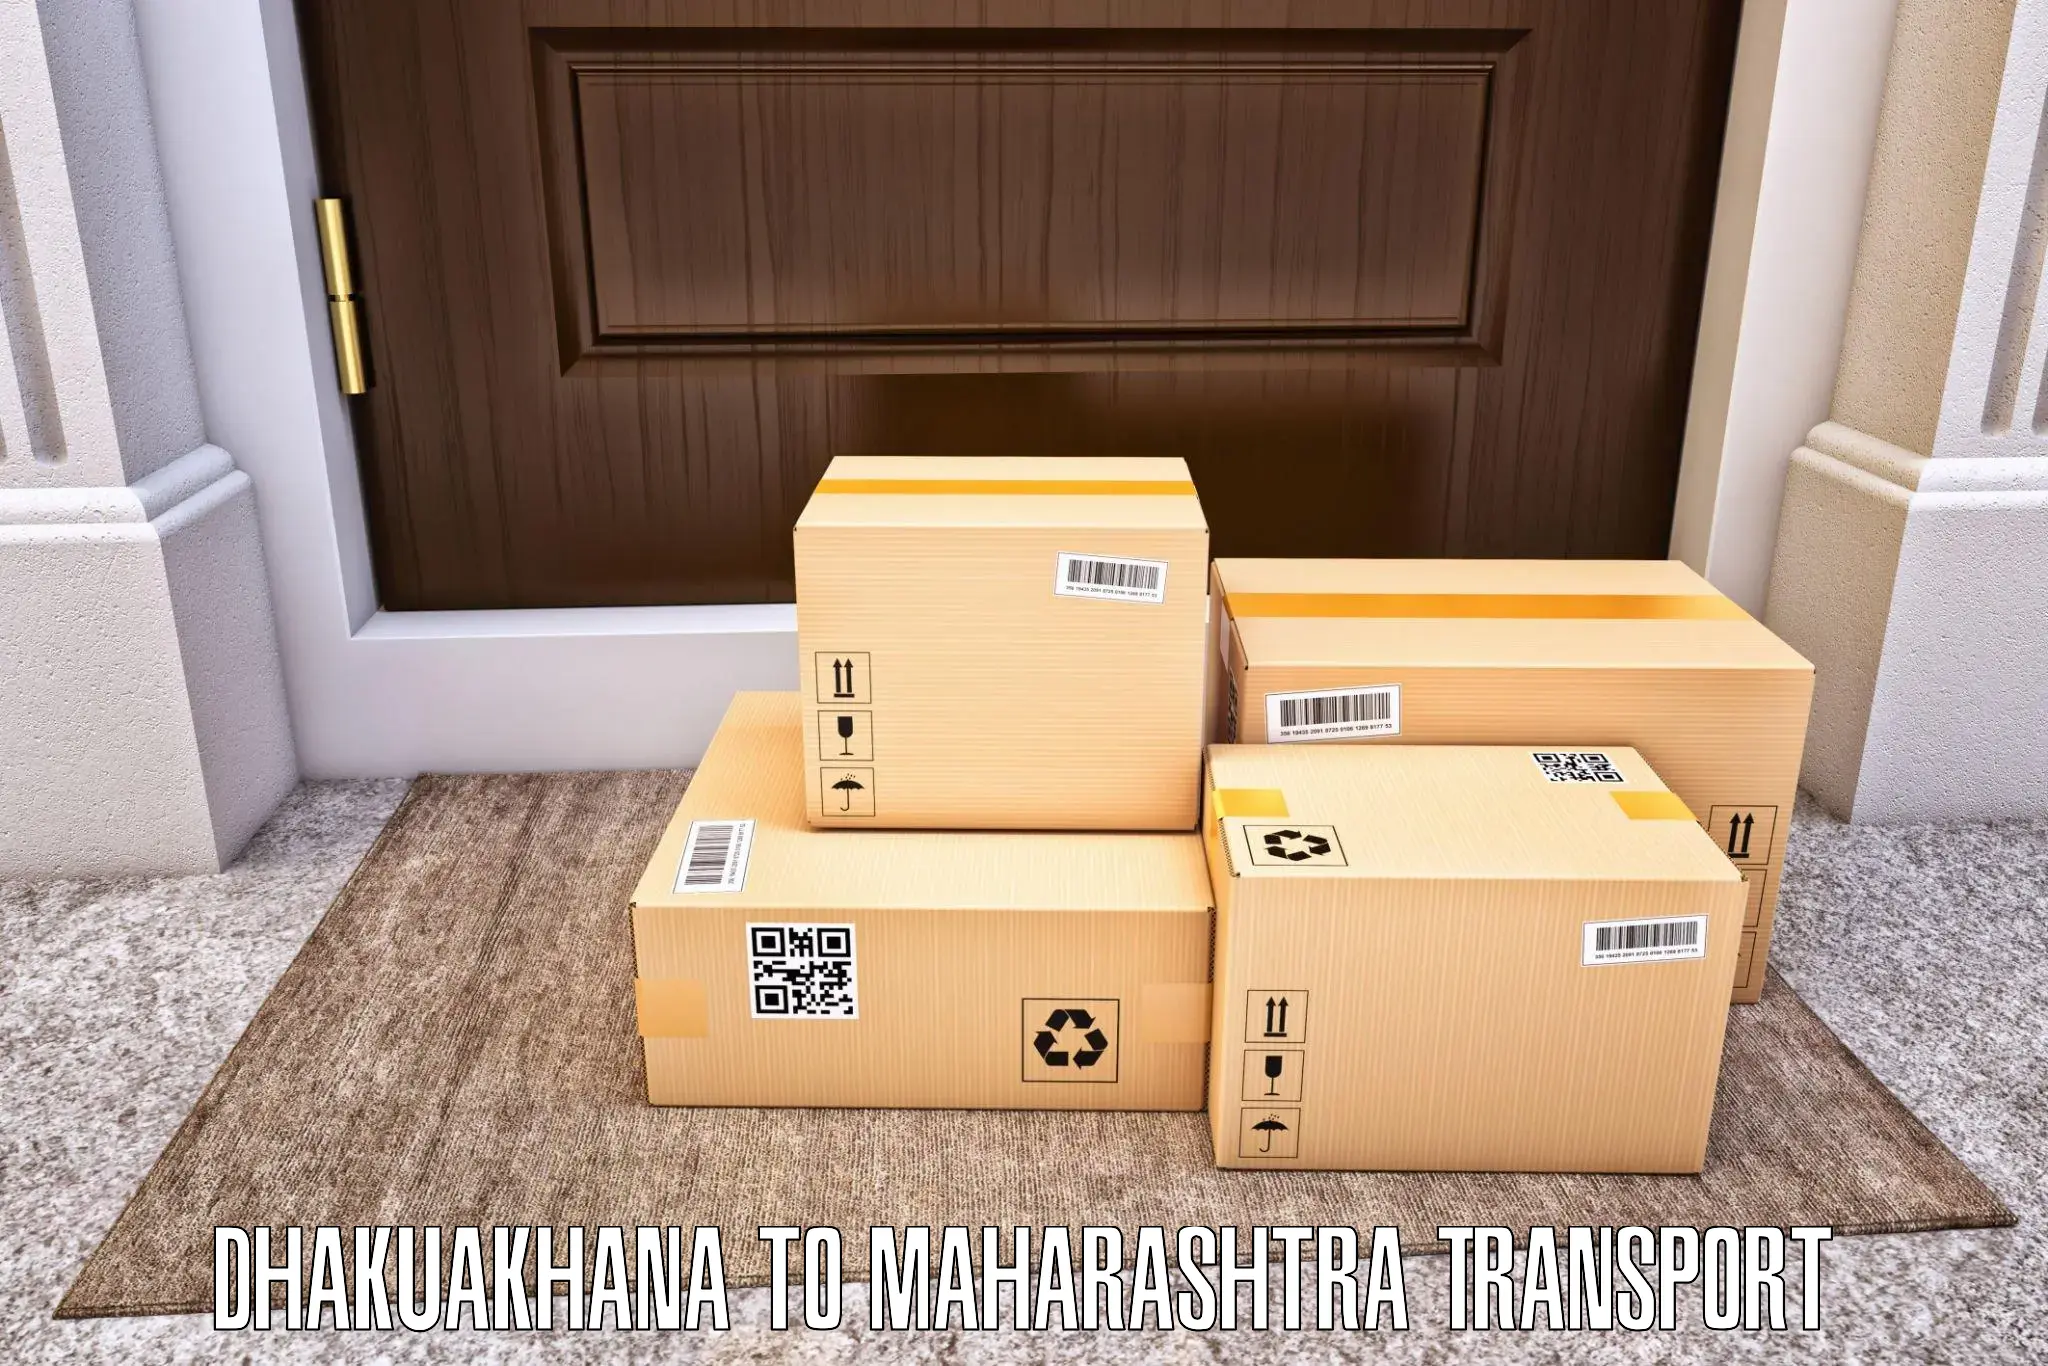 Express transport services in Dhakuakhana to Bhandara